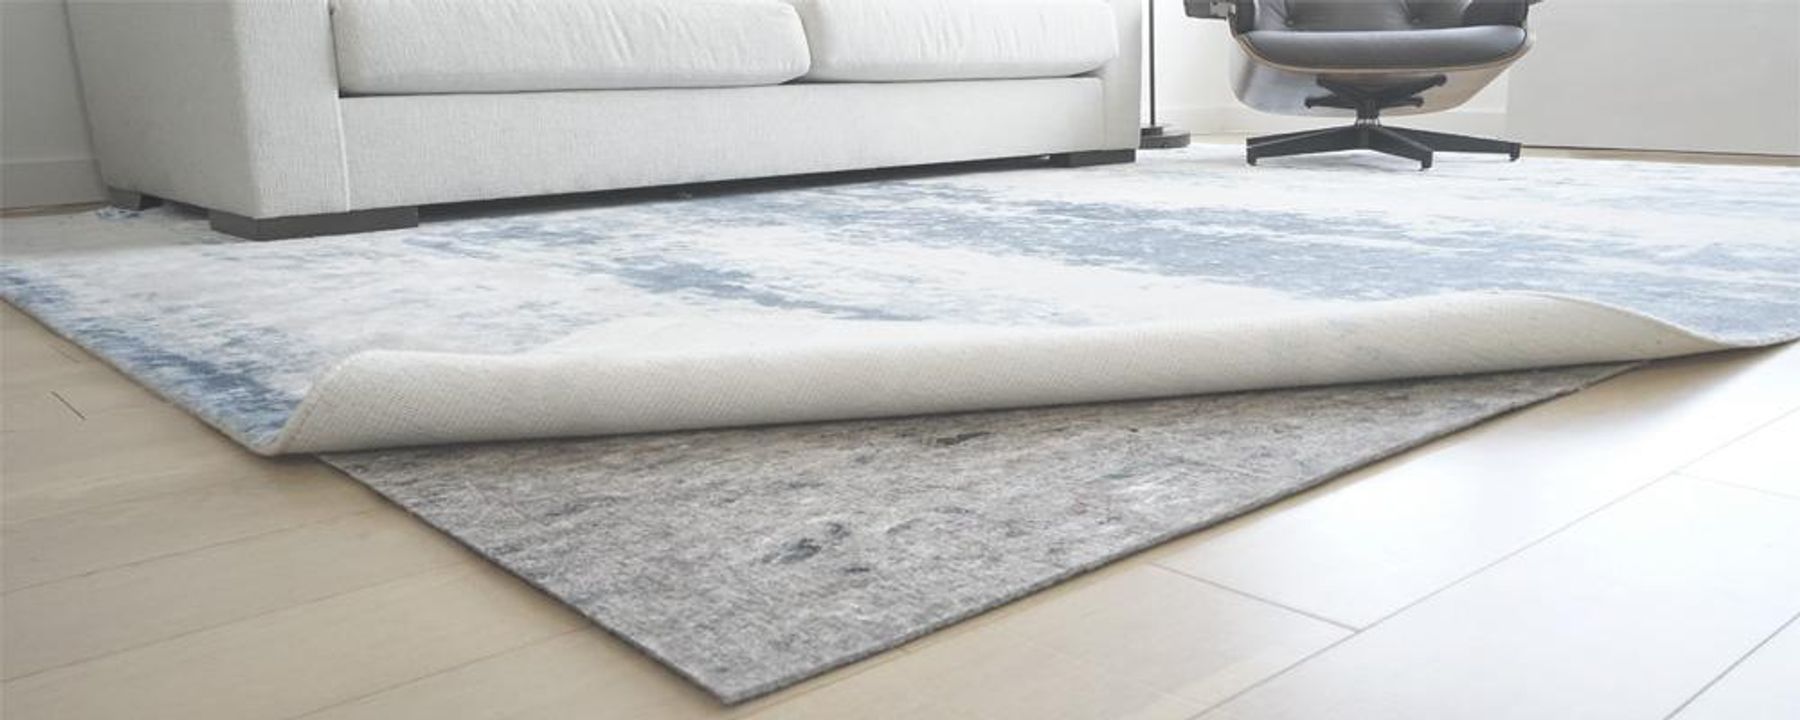 How to Pick the Perfect Area Rug